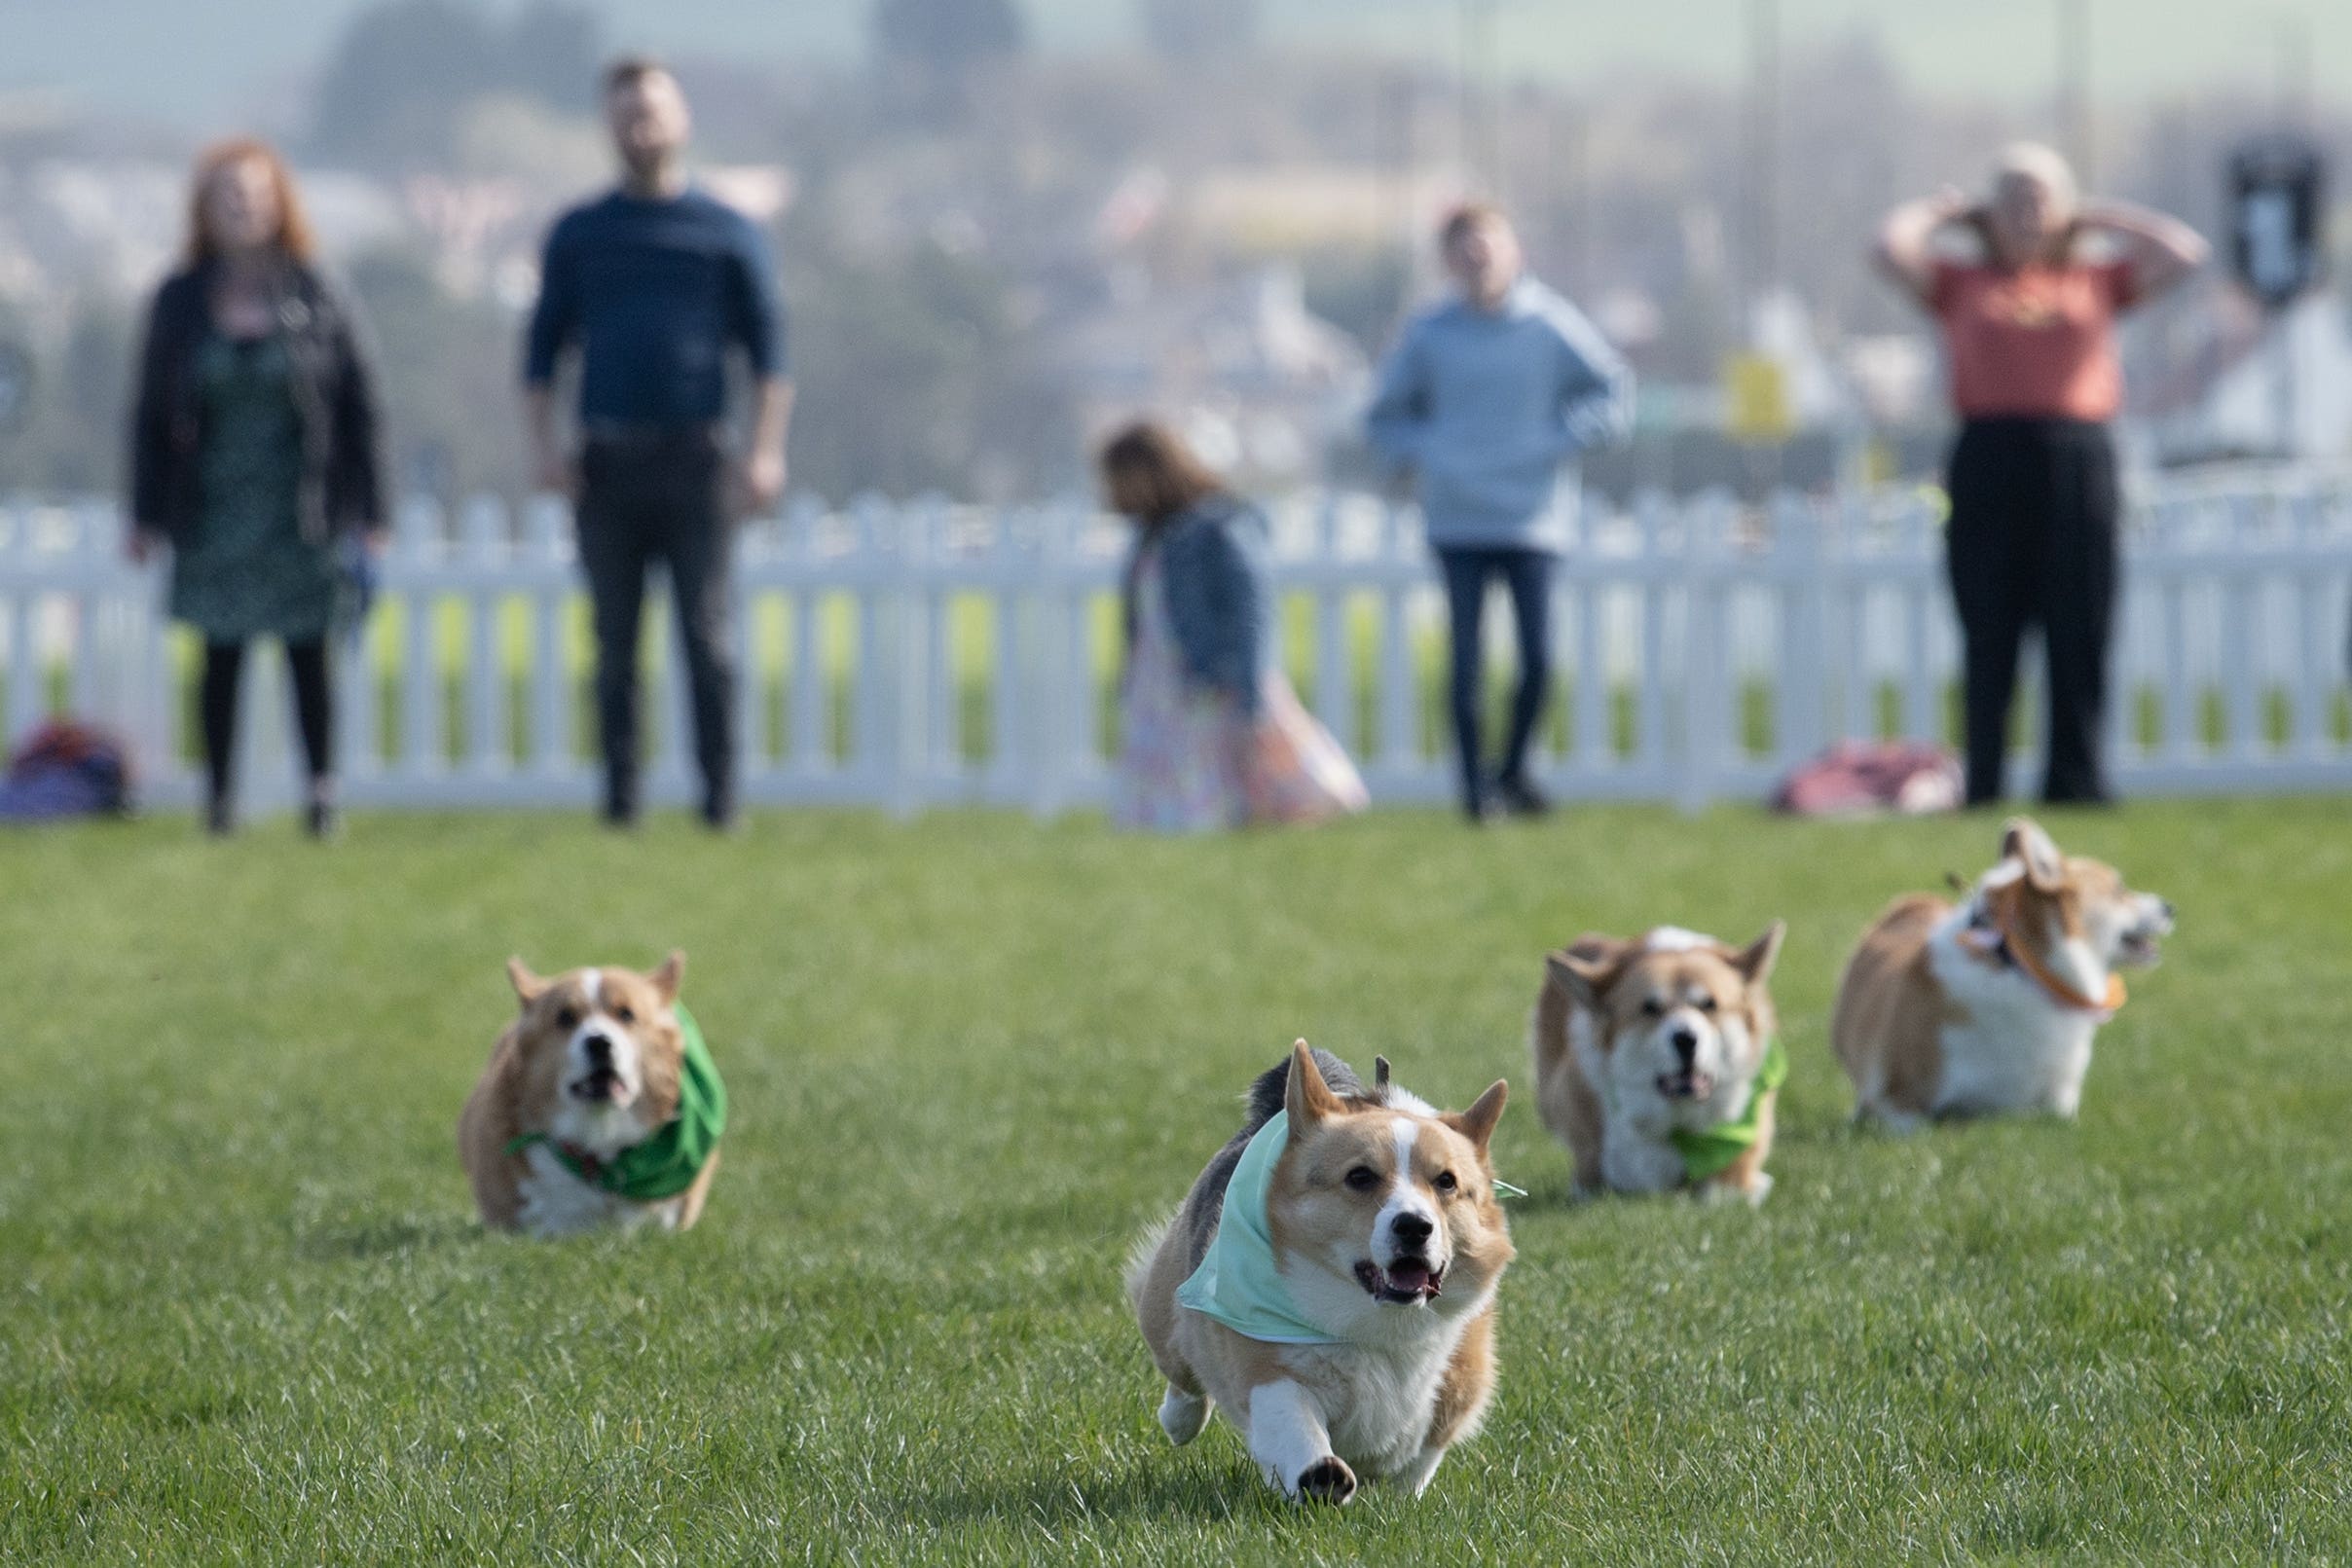 More than a dozen dogs took part in the derby dash (Lesley Martin/PA)